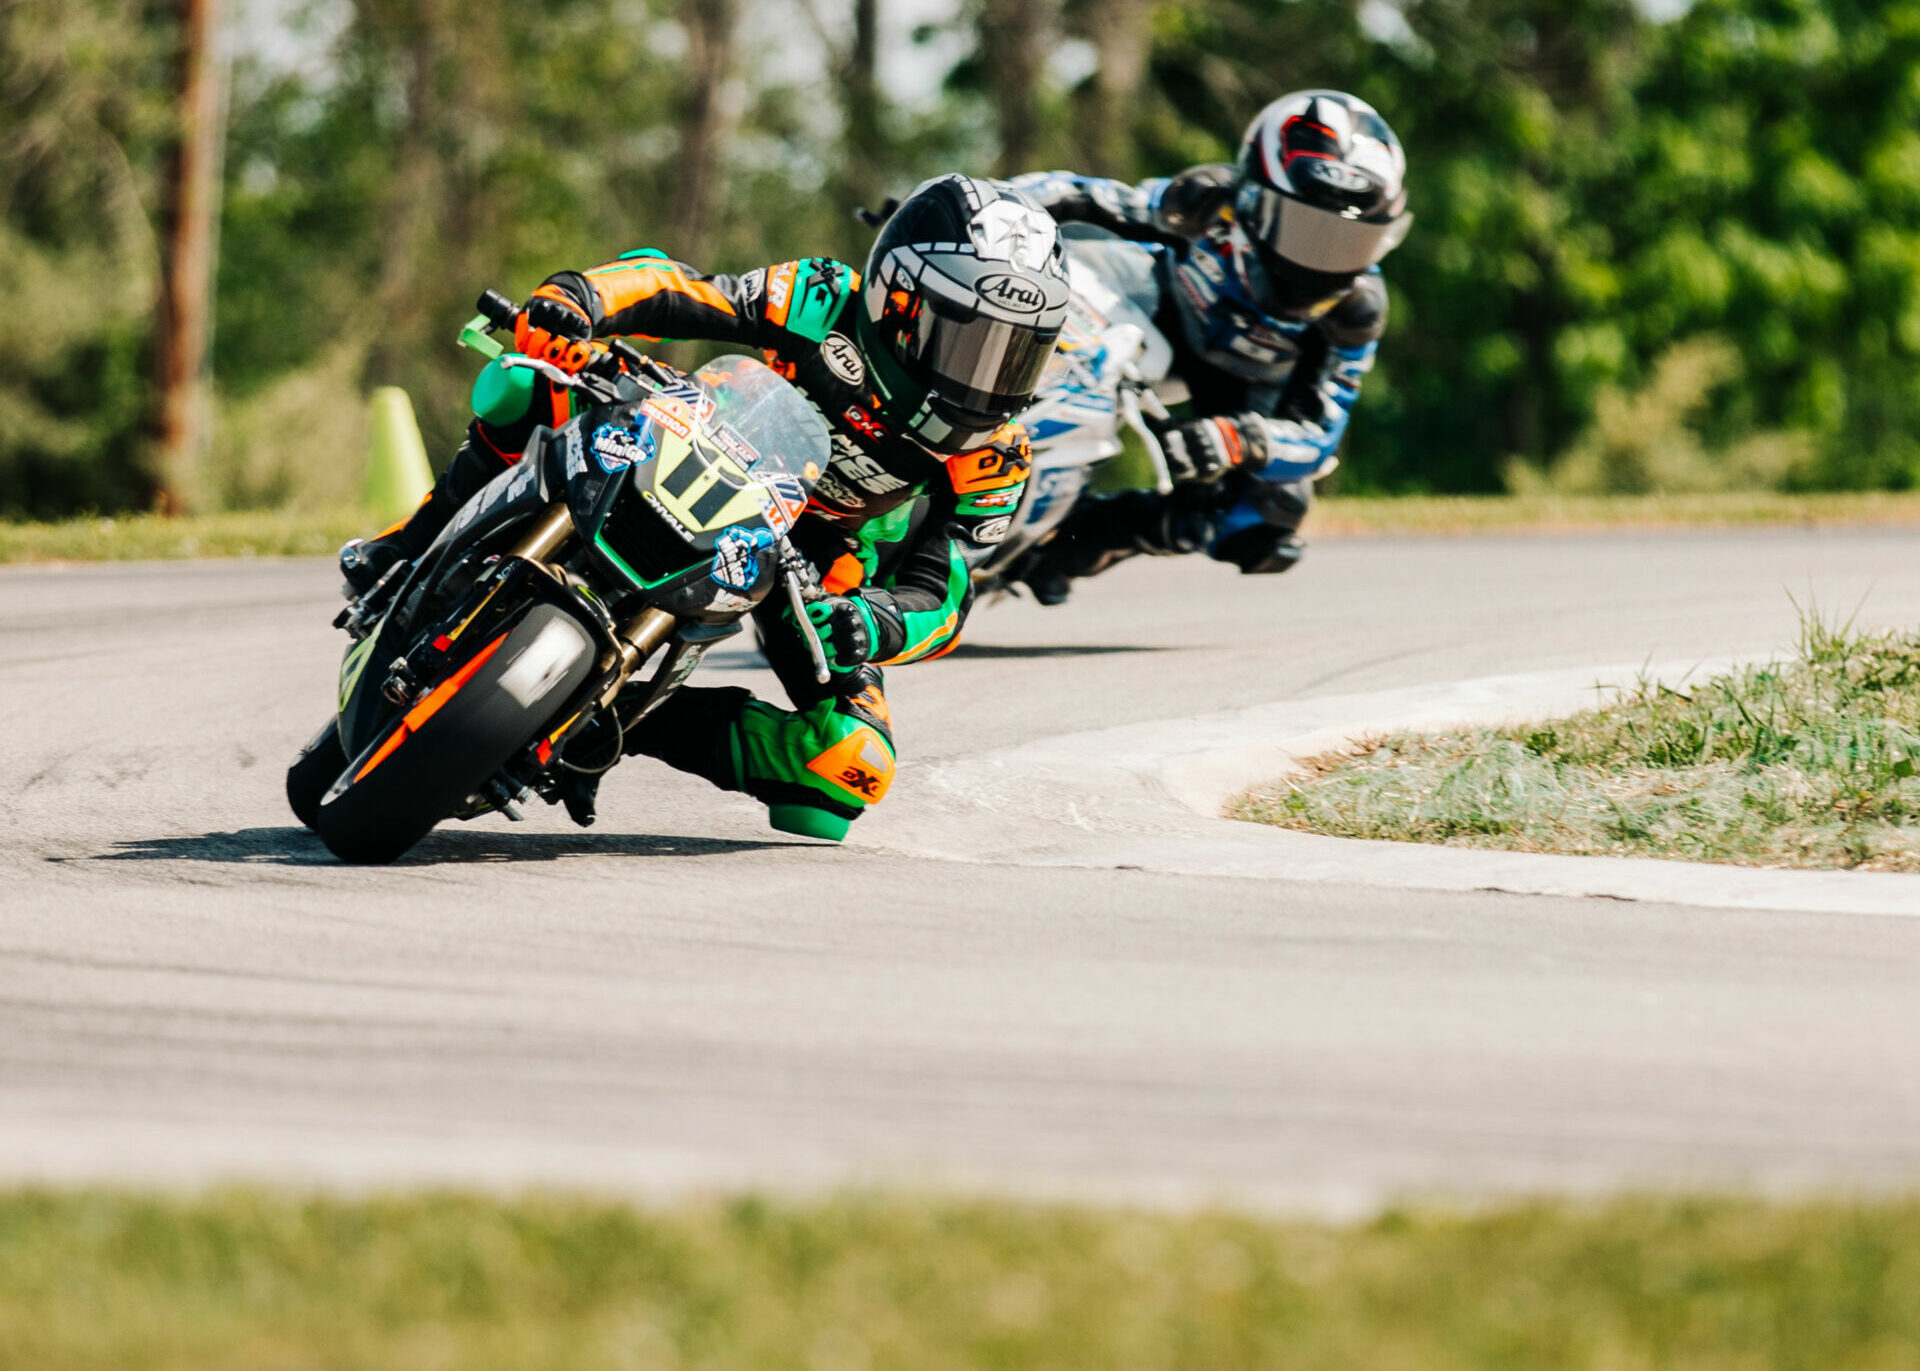 MotoAmerica Mini Cup racer Reese Frankenfield (11) in action Friday at Road America. Photo courtesy MotoAmerica.